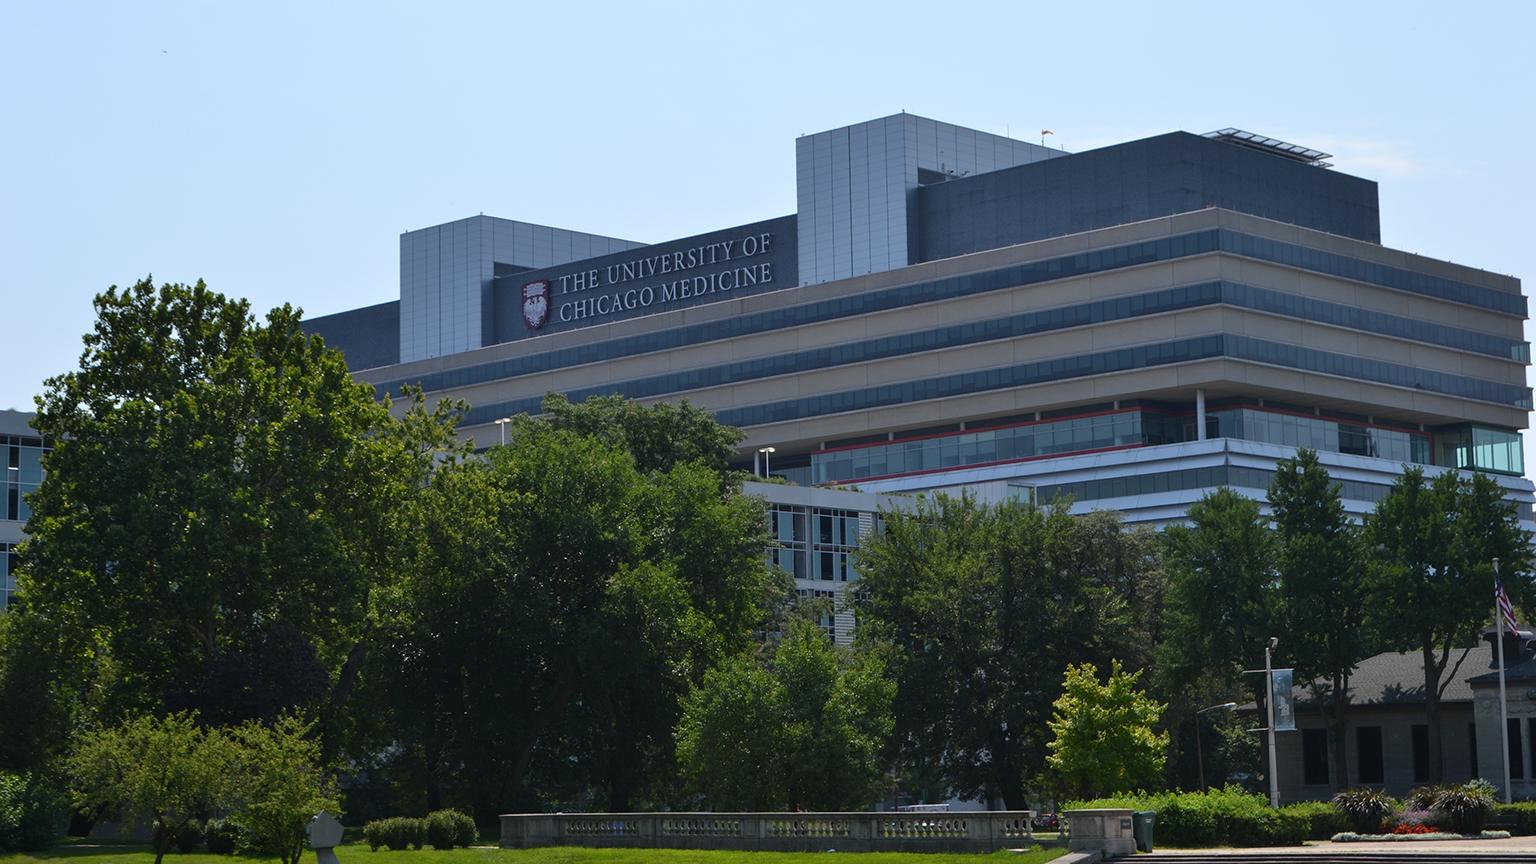 The 2018 Top Hospitals list includes the University of Chicago Medical Center for the third consecutive year. (Kristen Thometz / Chicago Tonight)